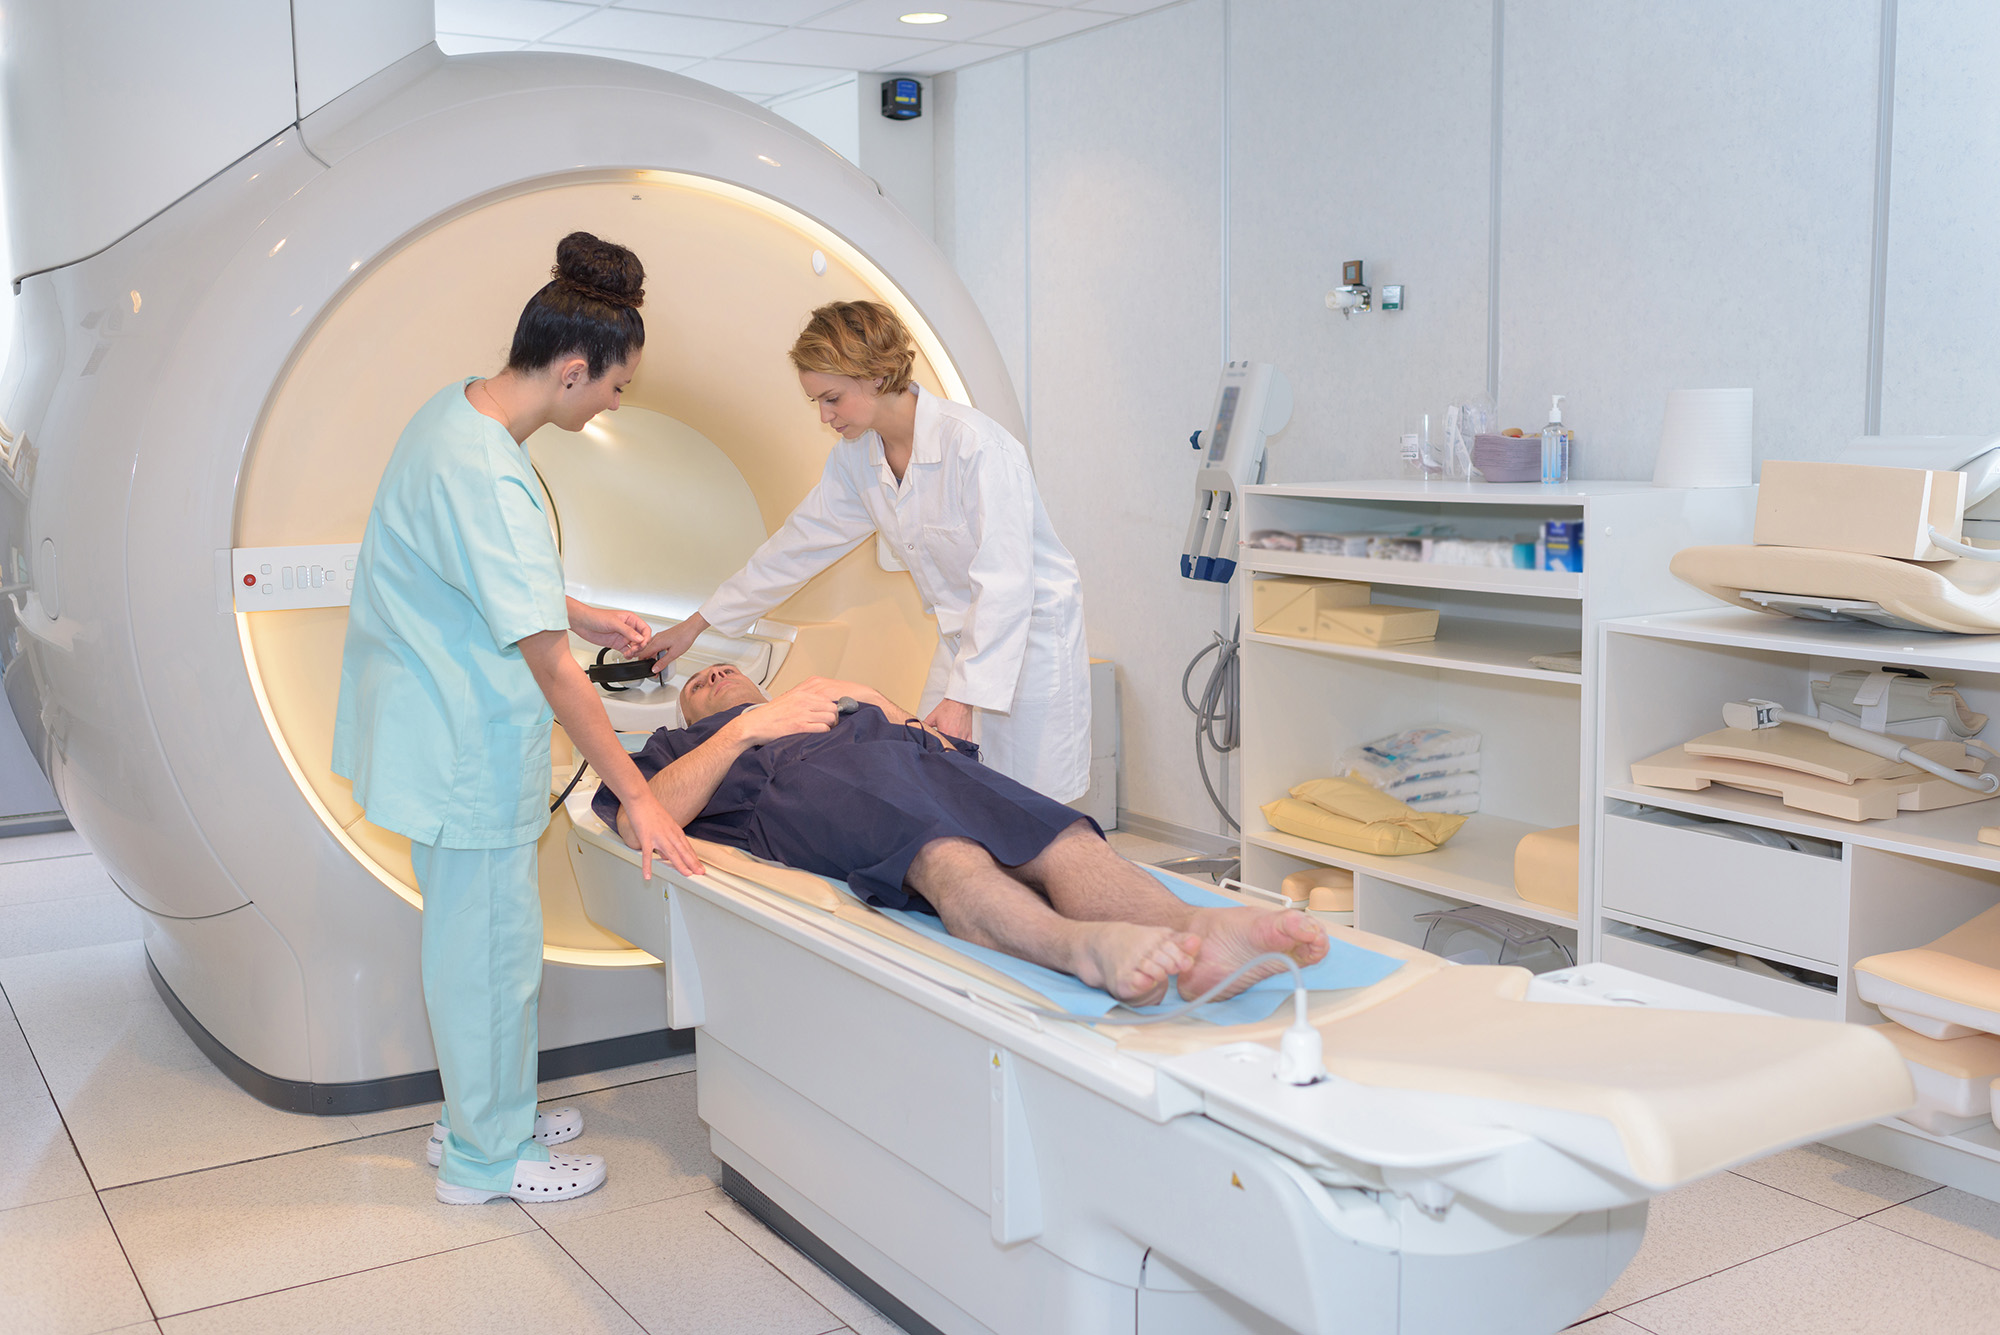 Health care workers prepare a patient for an MRI.